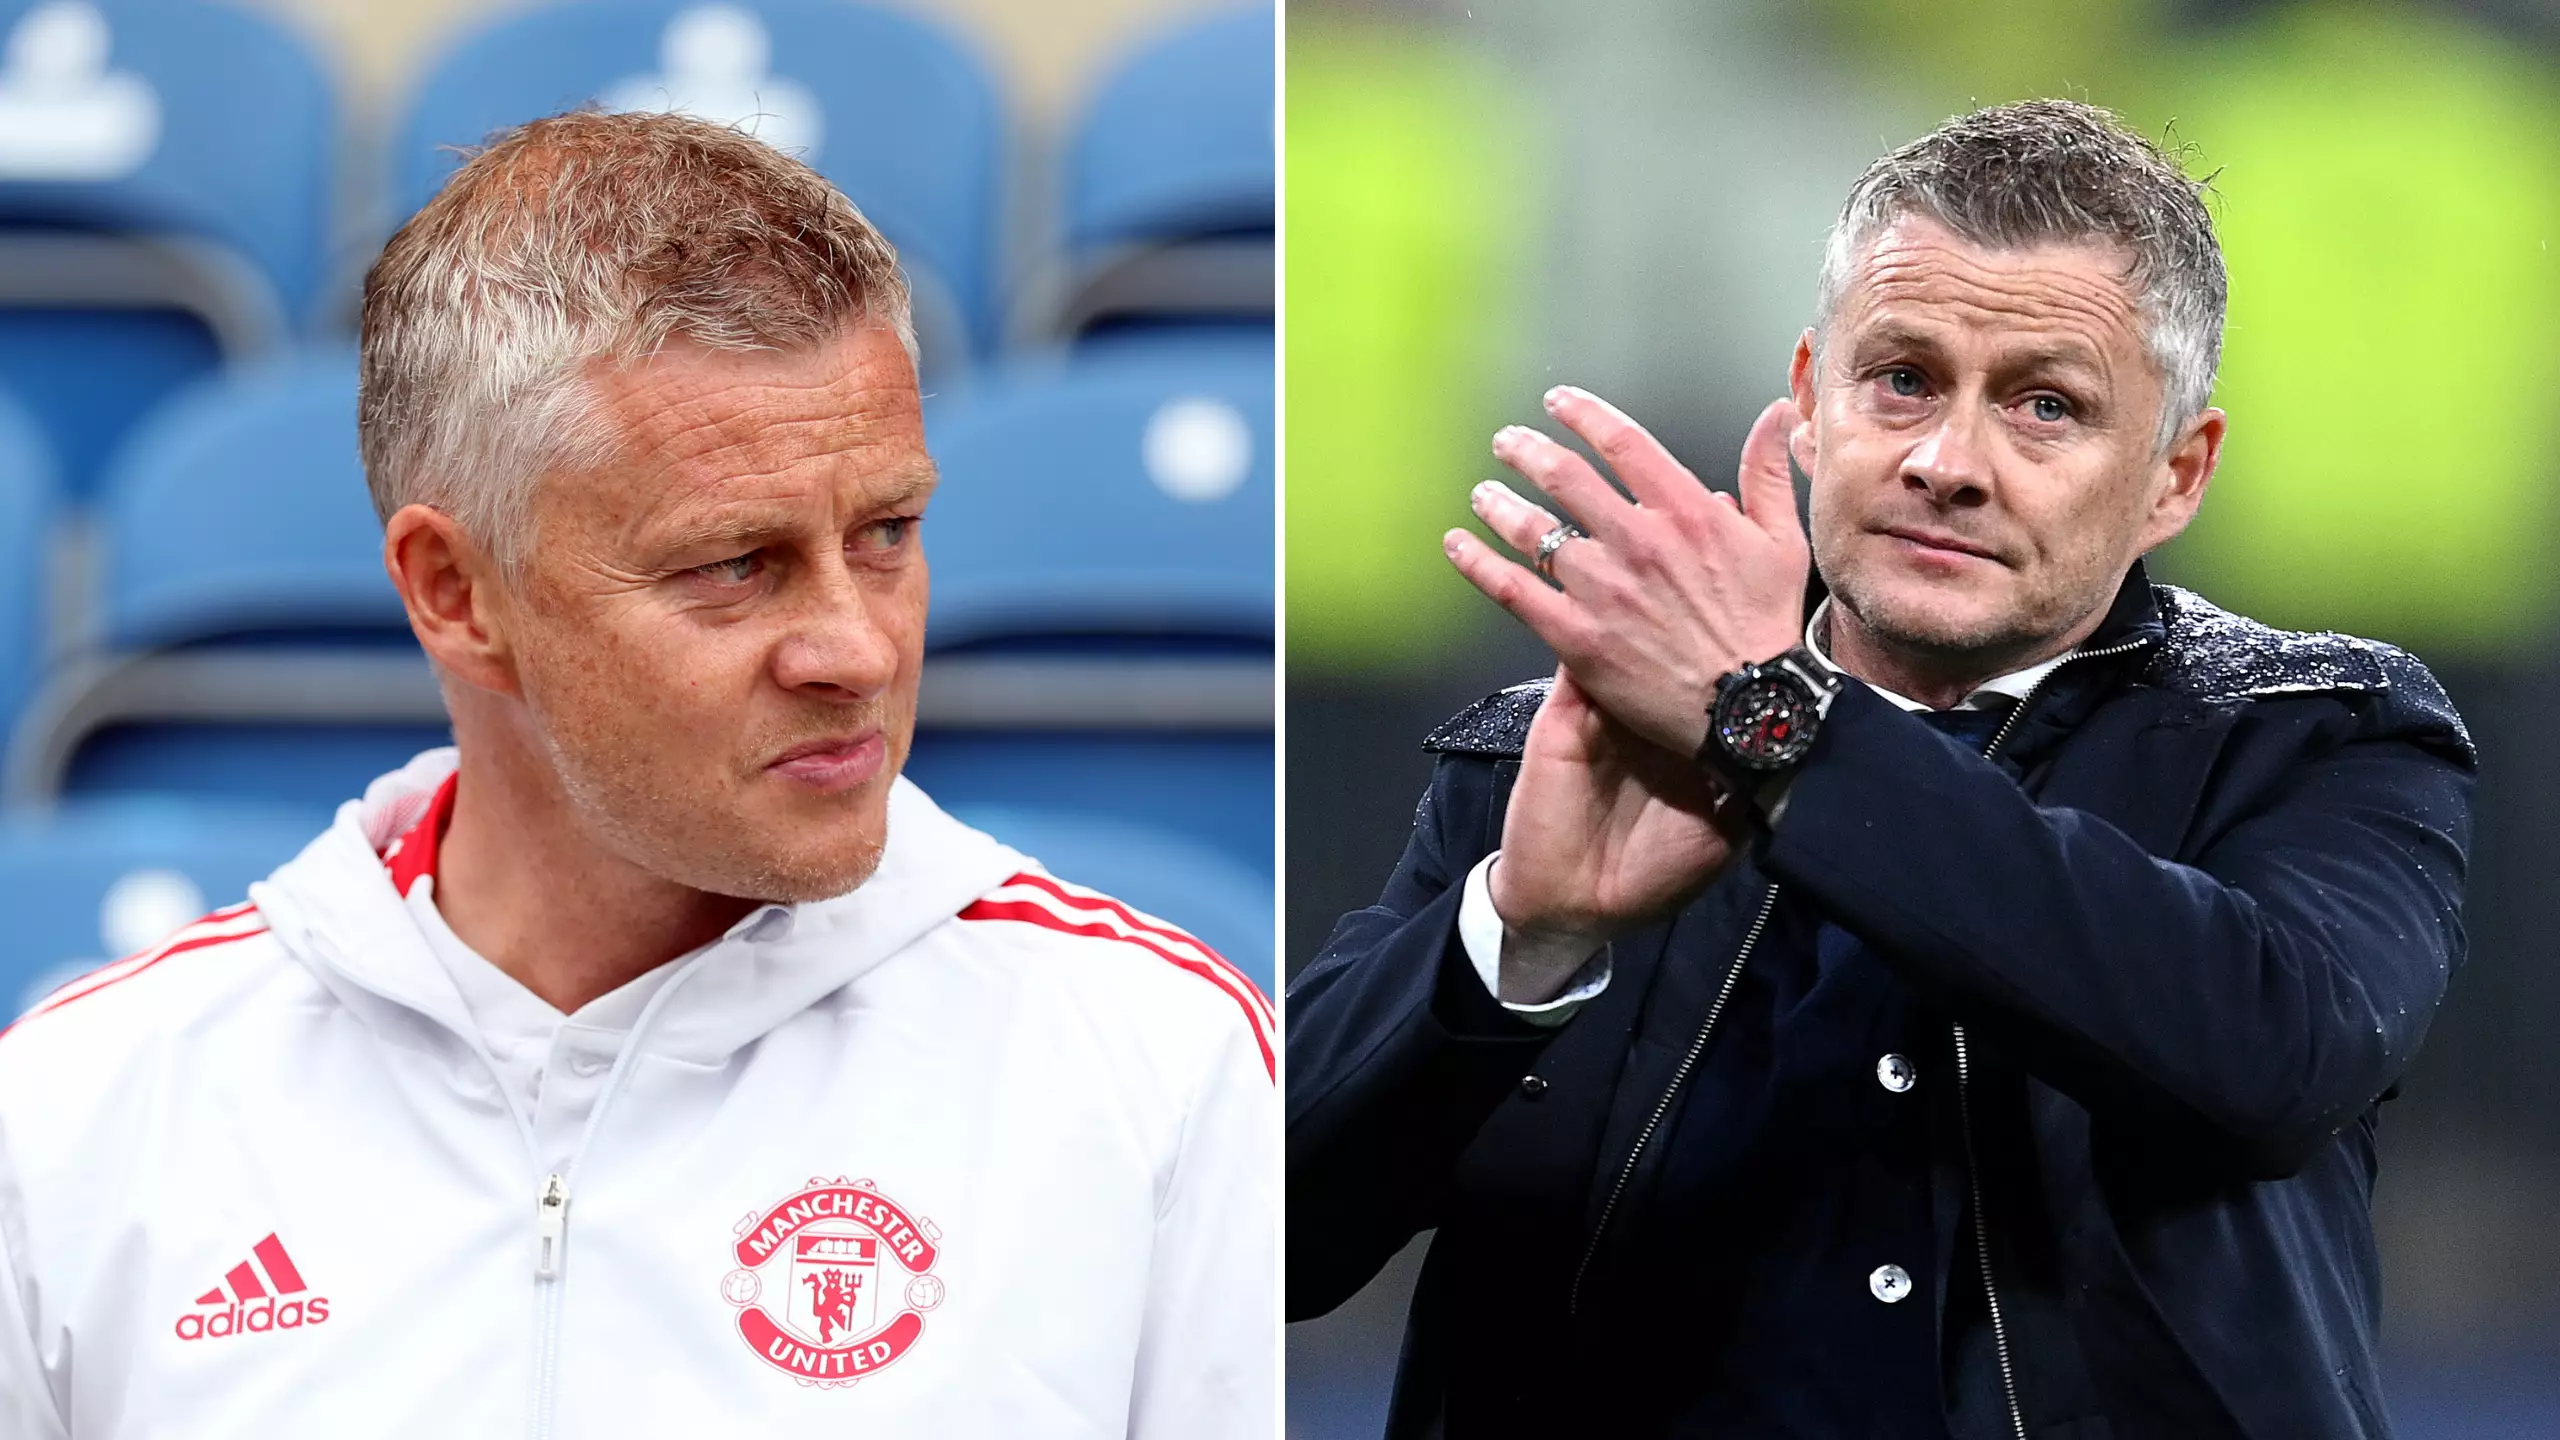 'No Other Premier League Club Would Appoint Ole Gunnar Solskjaer As Manager'